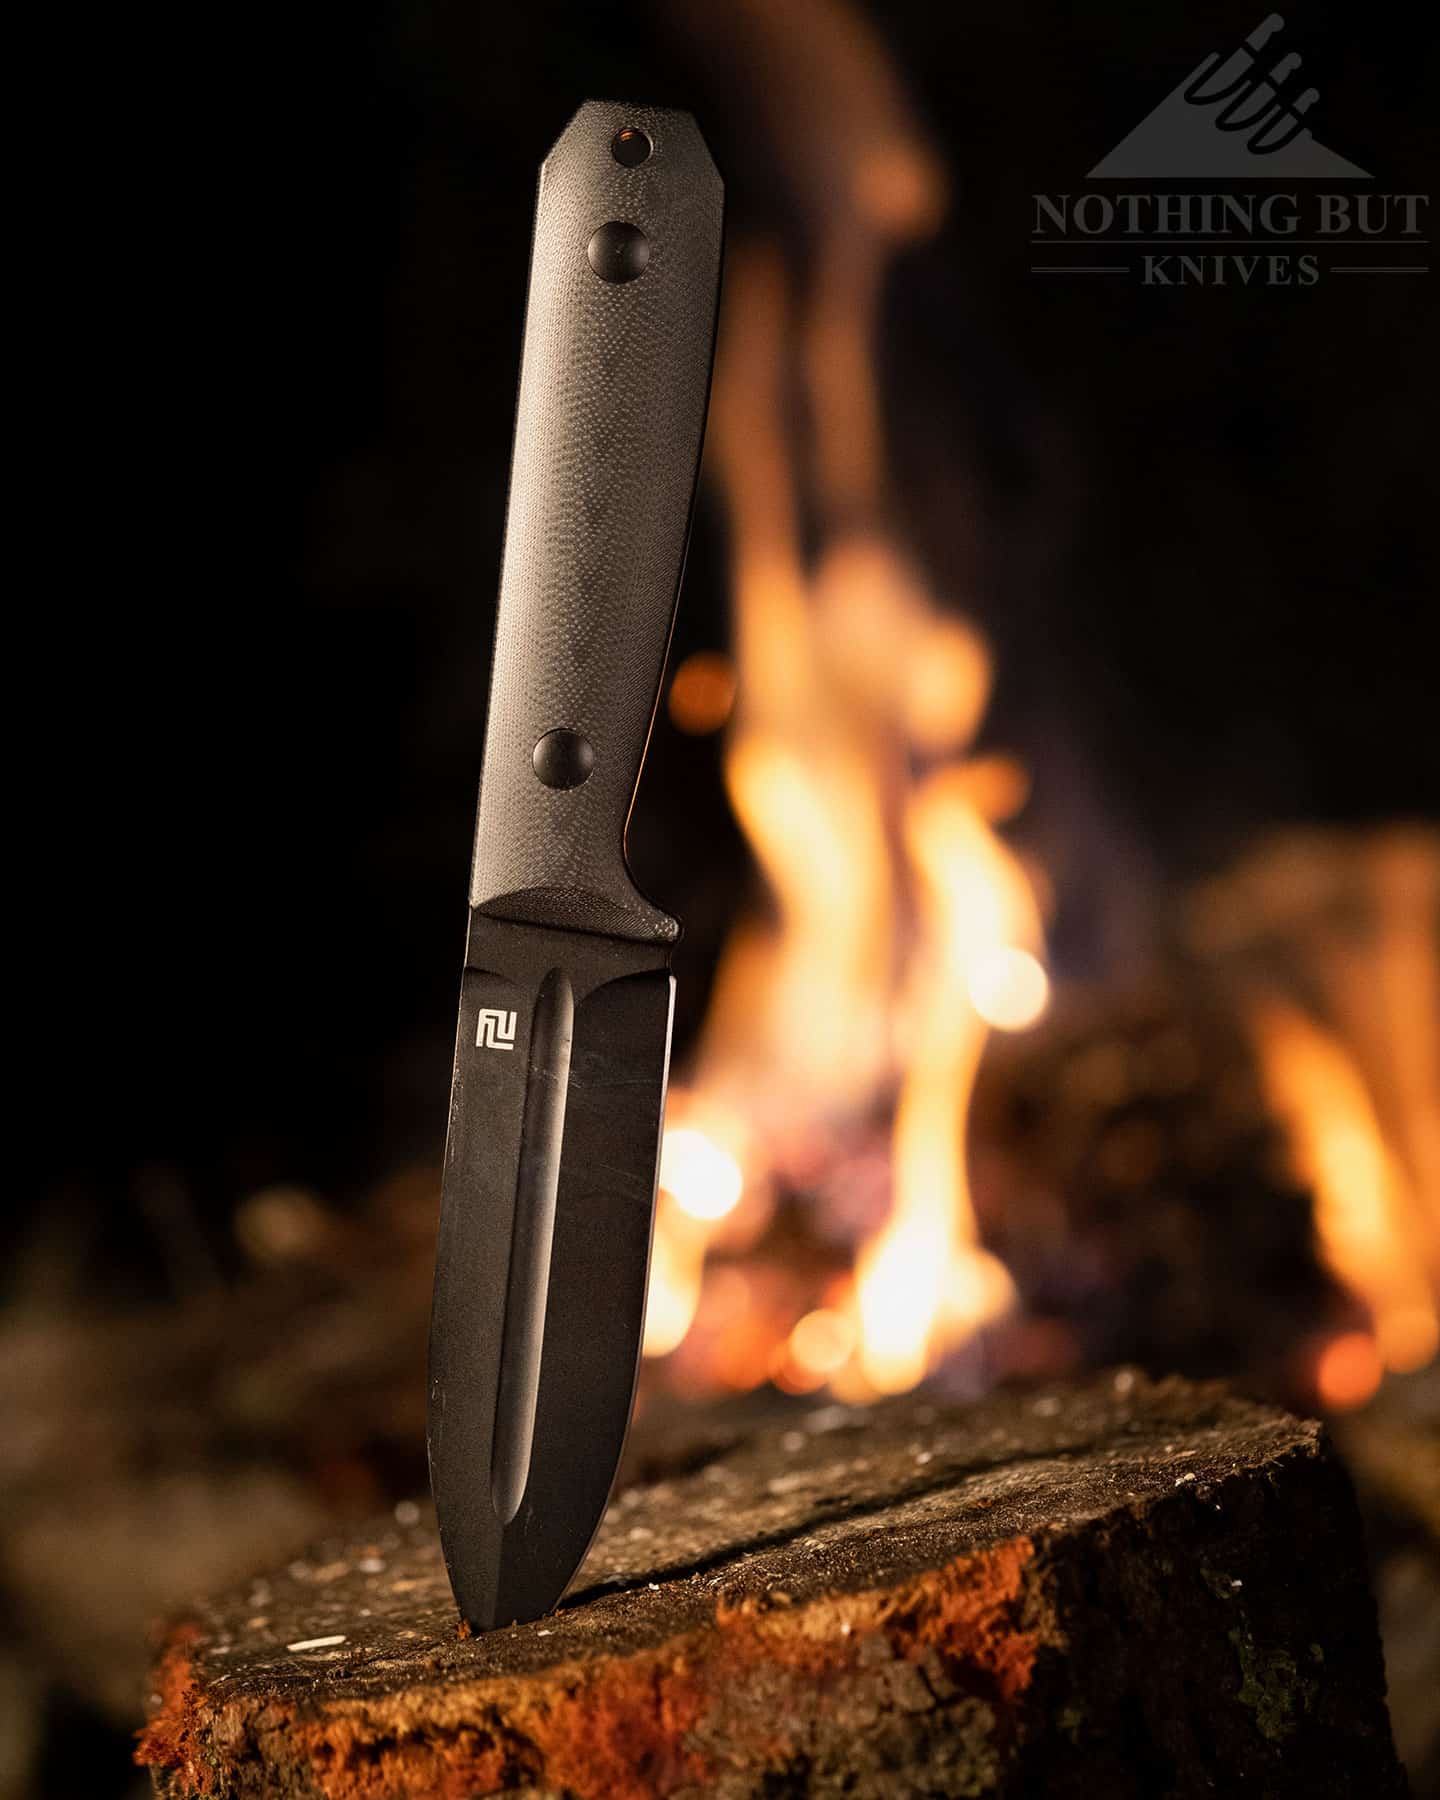 The Artisan Cutlery Wreckhart won a Drunken Hillbilly award for Best Tactical Fixed Blade that's Good for Other Stuff Too.